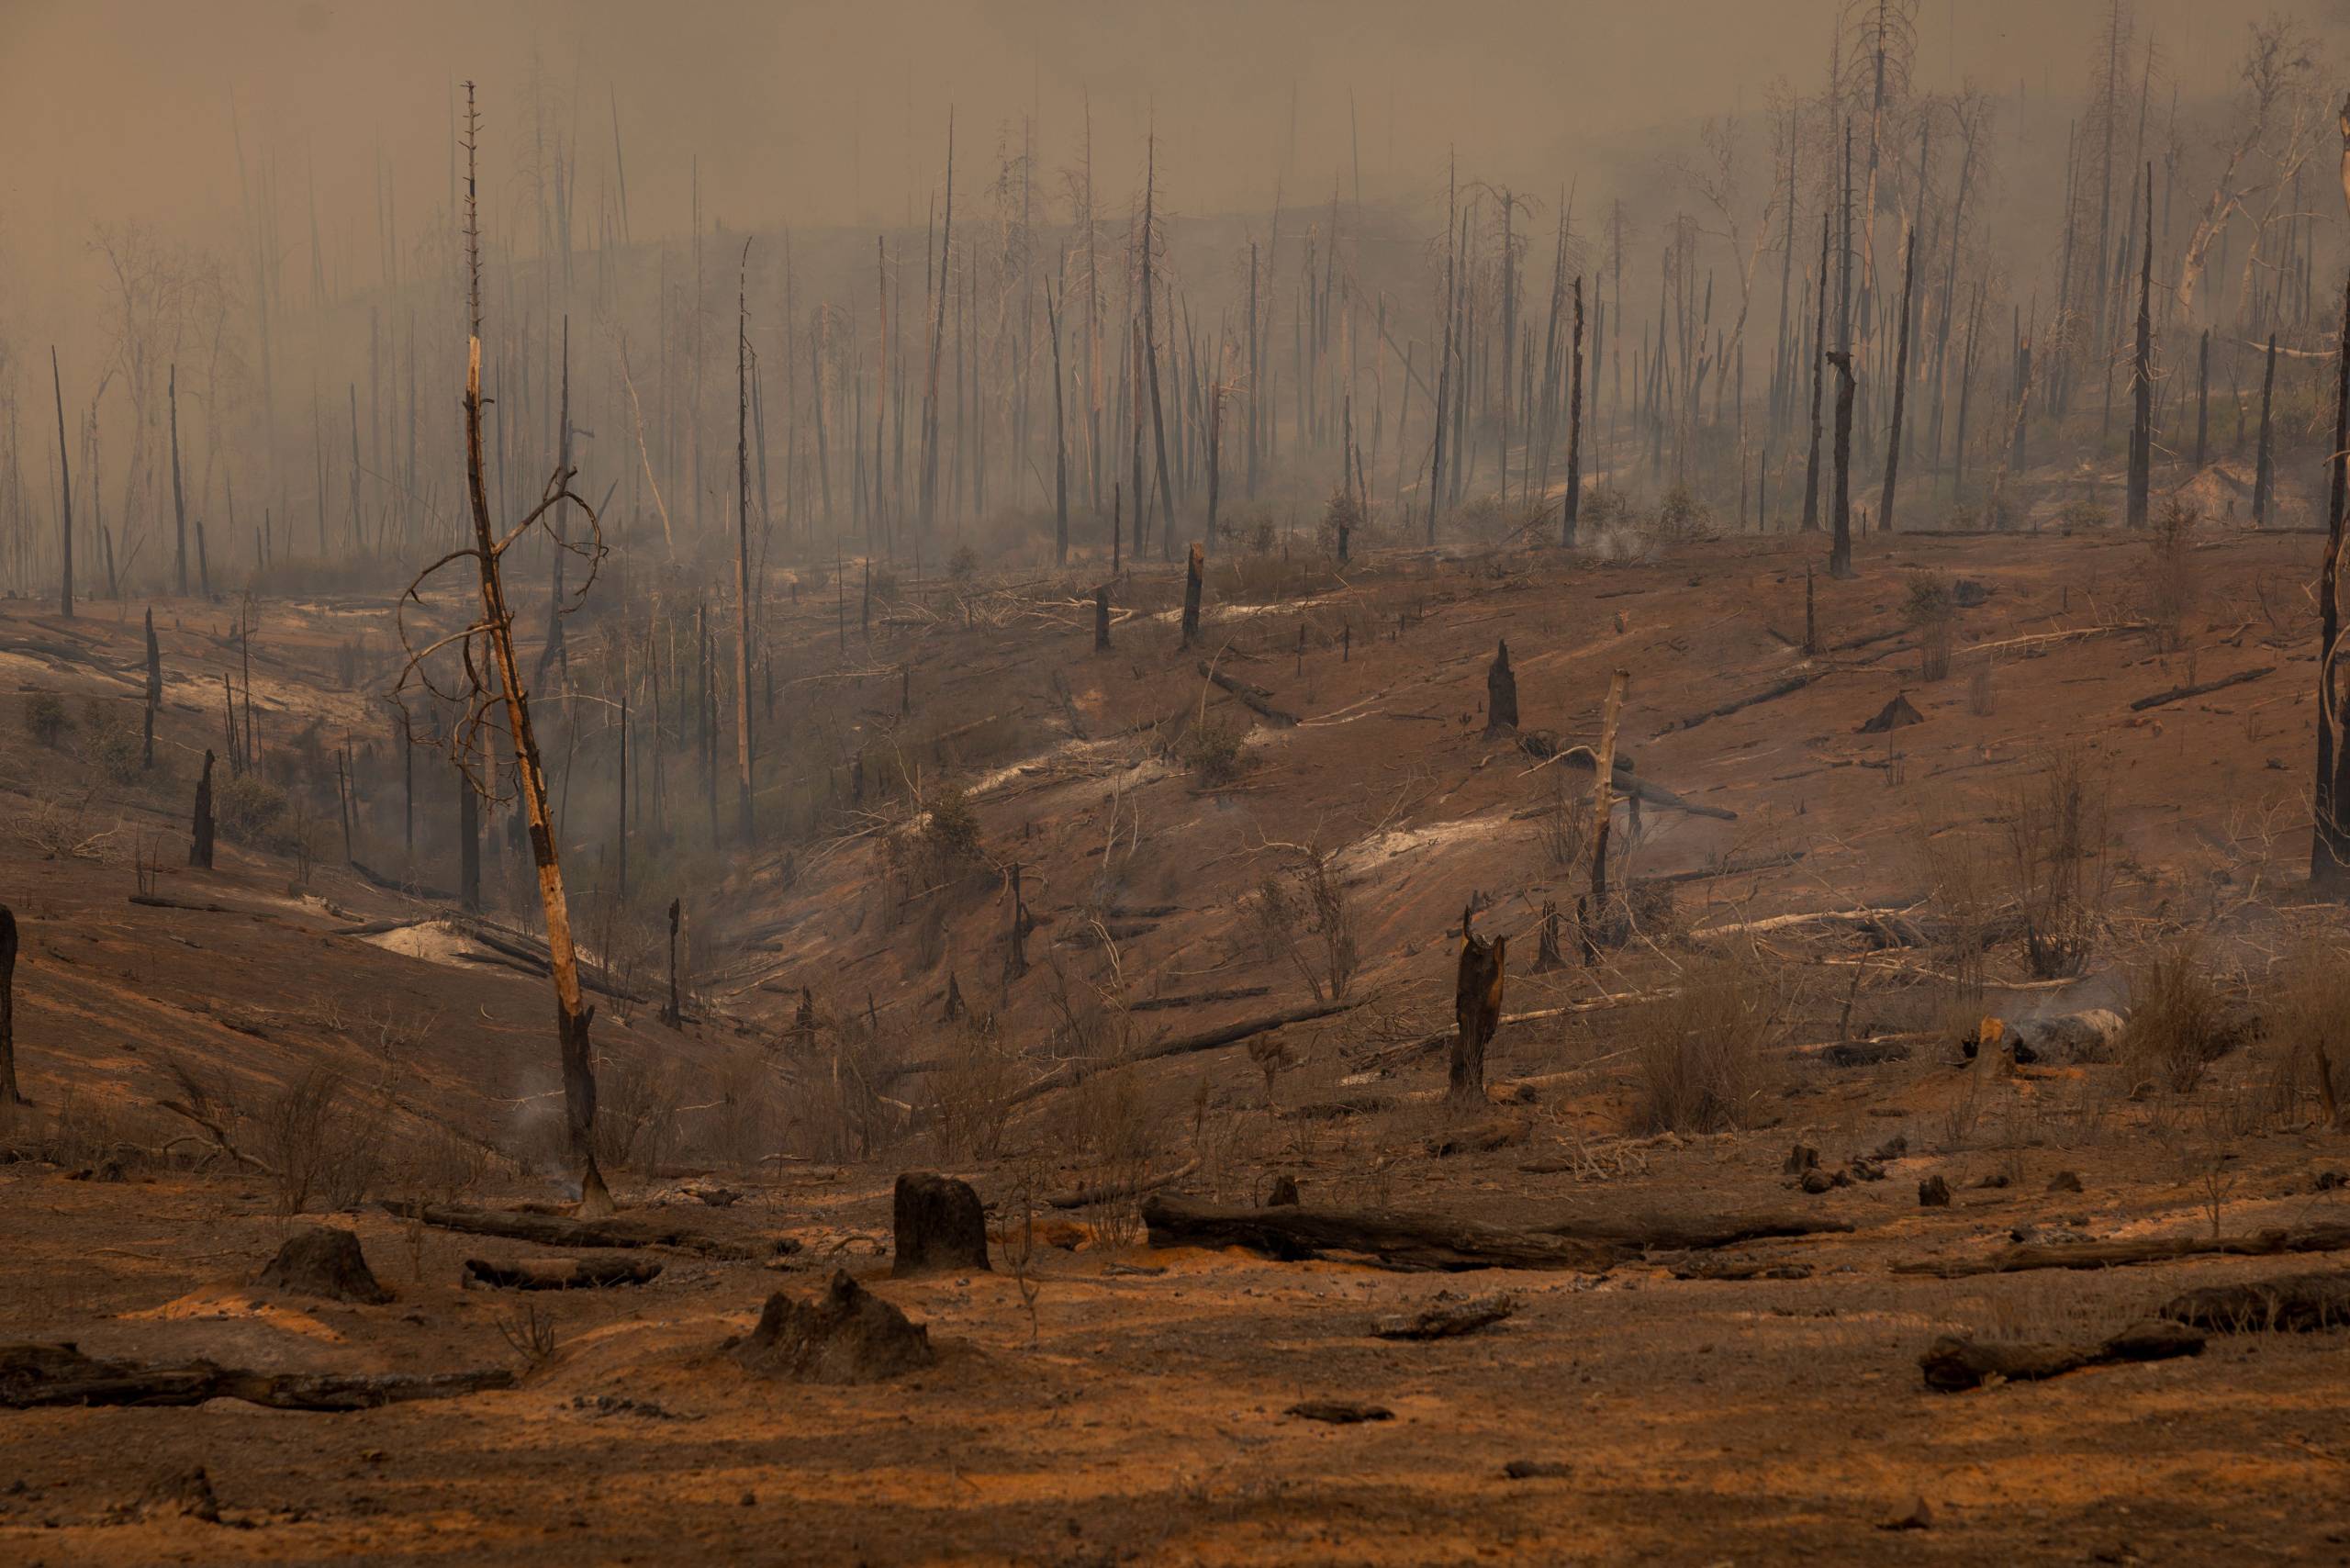 A forest is left barren with charred tree trunks amid a gray clouded sky and burned earth.